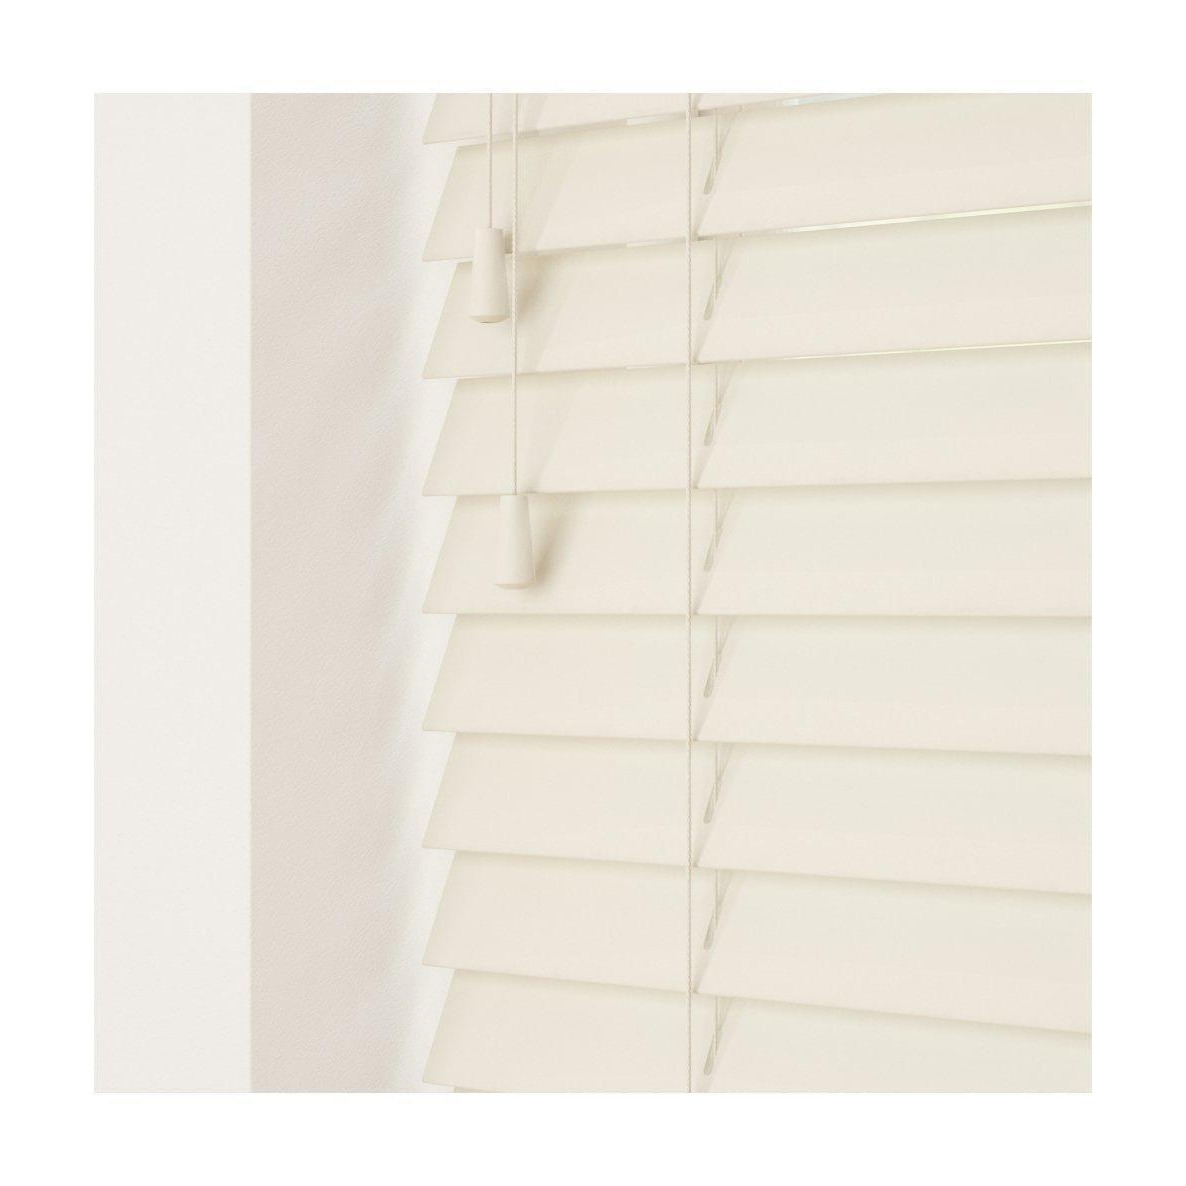 Smooth Finish Faux Wood Venetian Blinds with Strings 130cm Drop